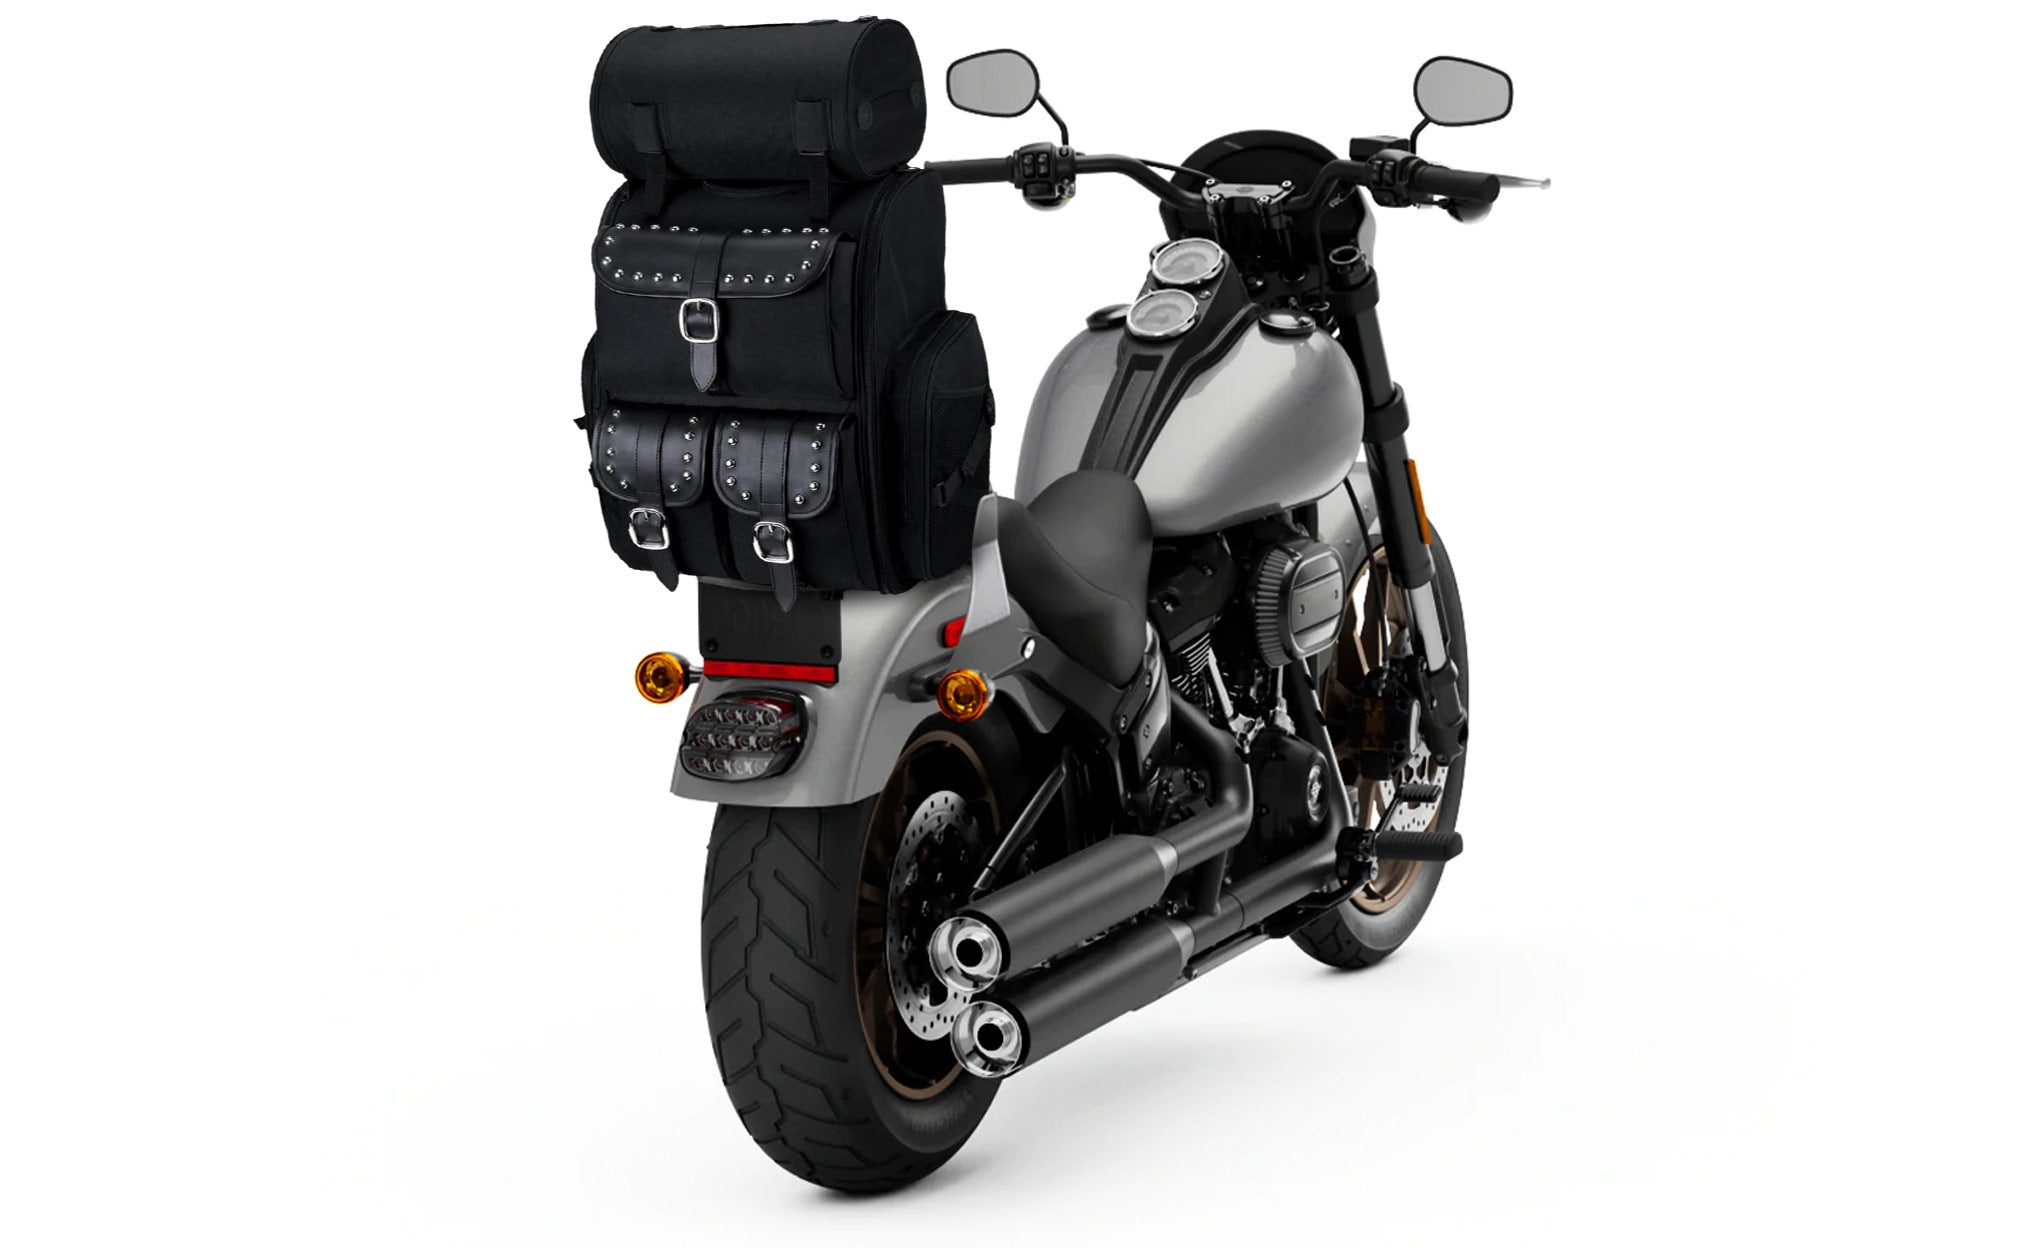 Viking Highway Extra Large Studded Indian Motorcycle Tail Bag Bag on Bike View @expand